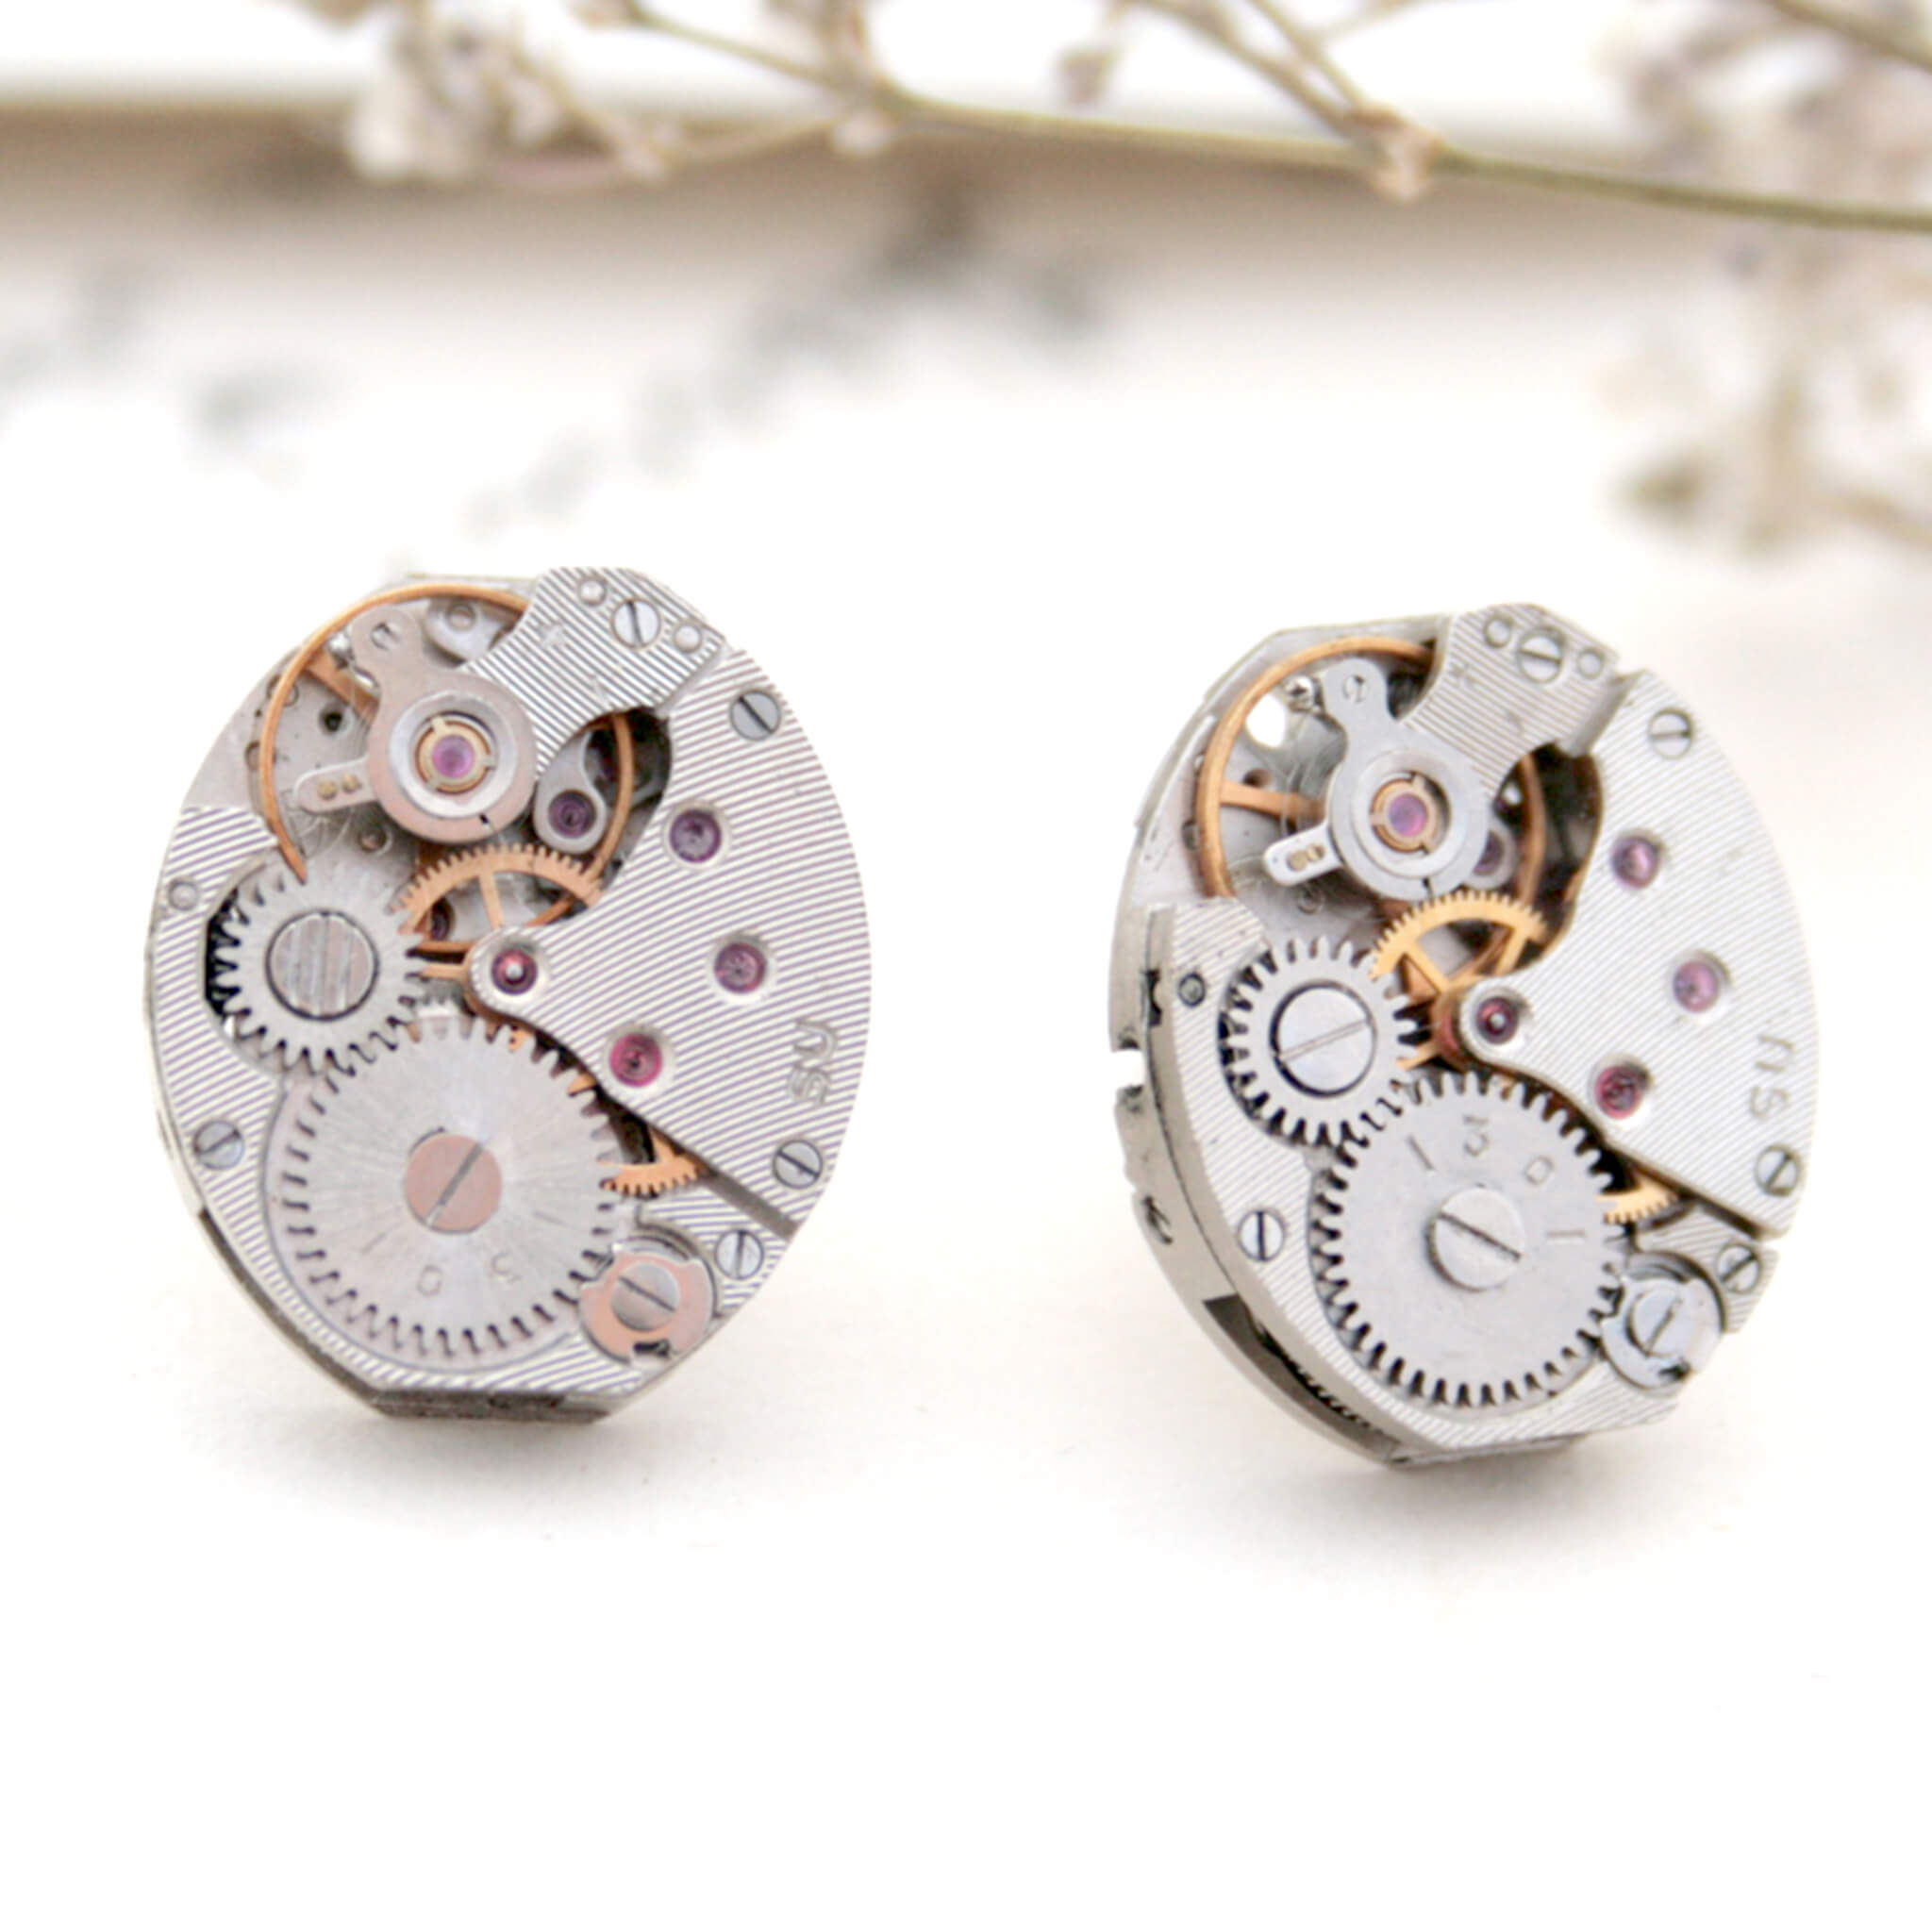 Watch movements turned into stud earrings lying on a vintage paper